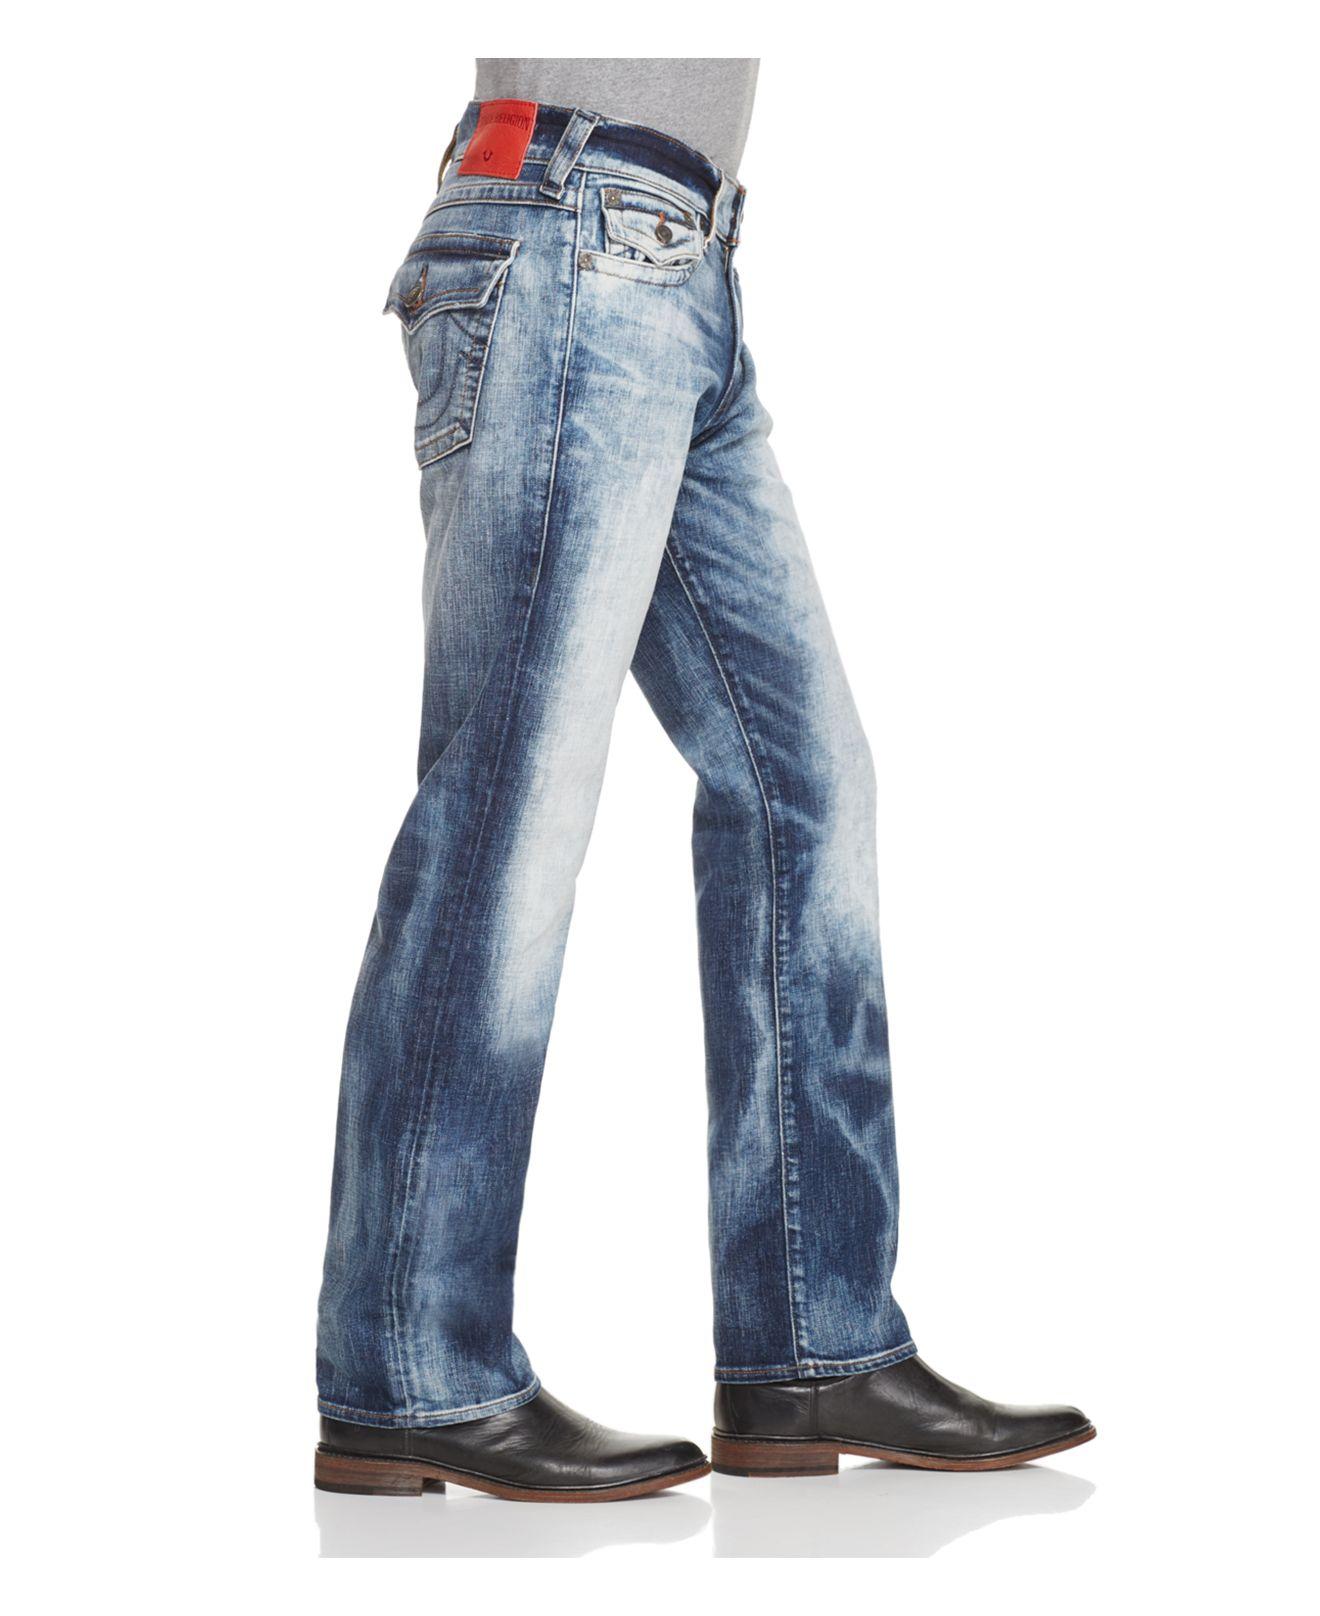 True Religion Denim Ricky Straight Fit Jeans In Cape Town in Blue for Men - Lyst